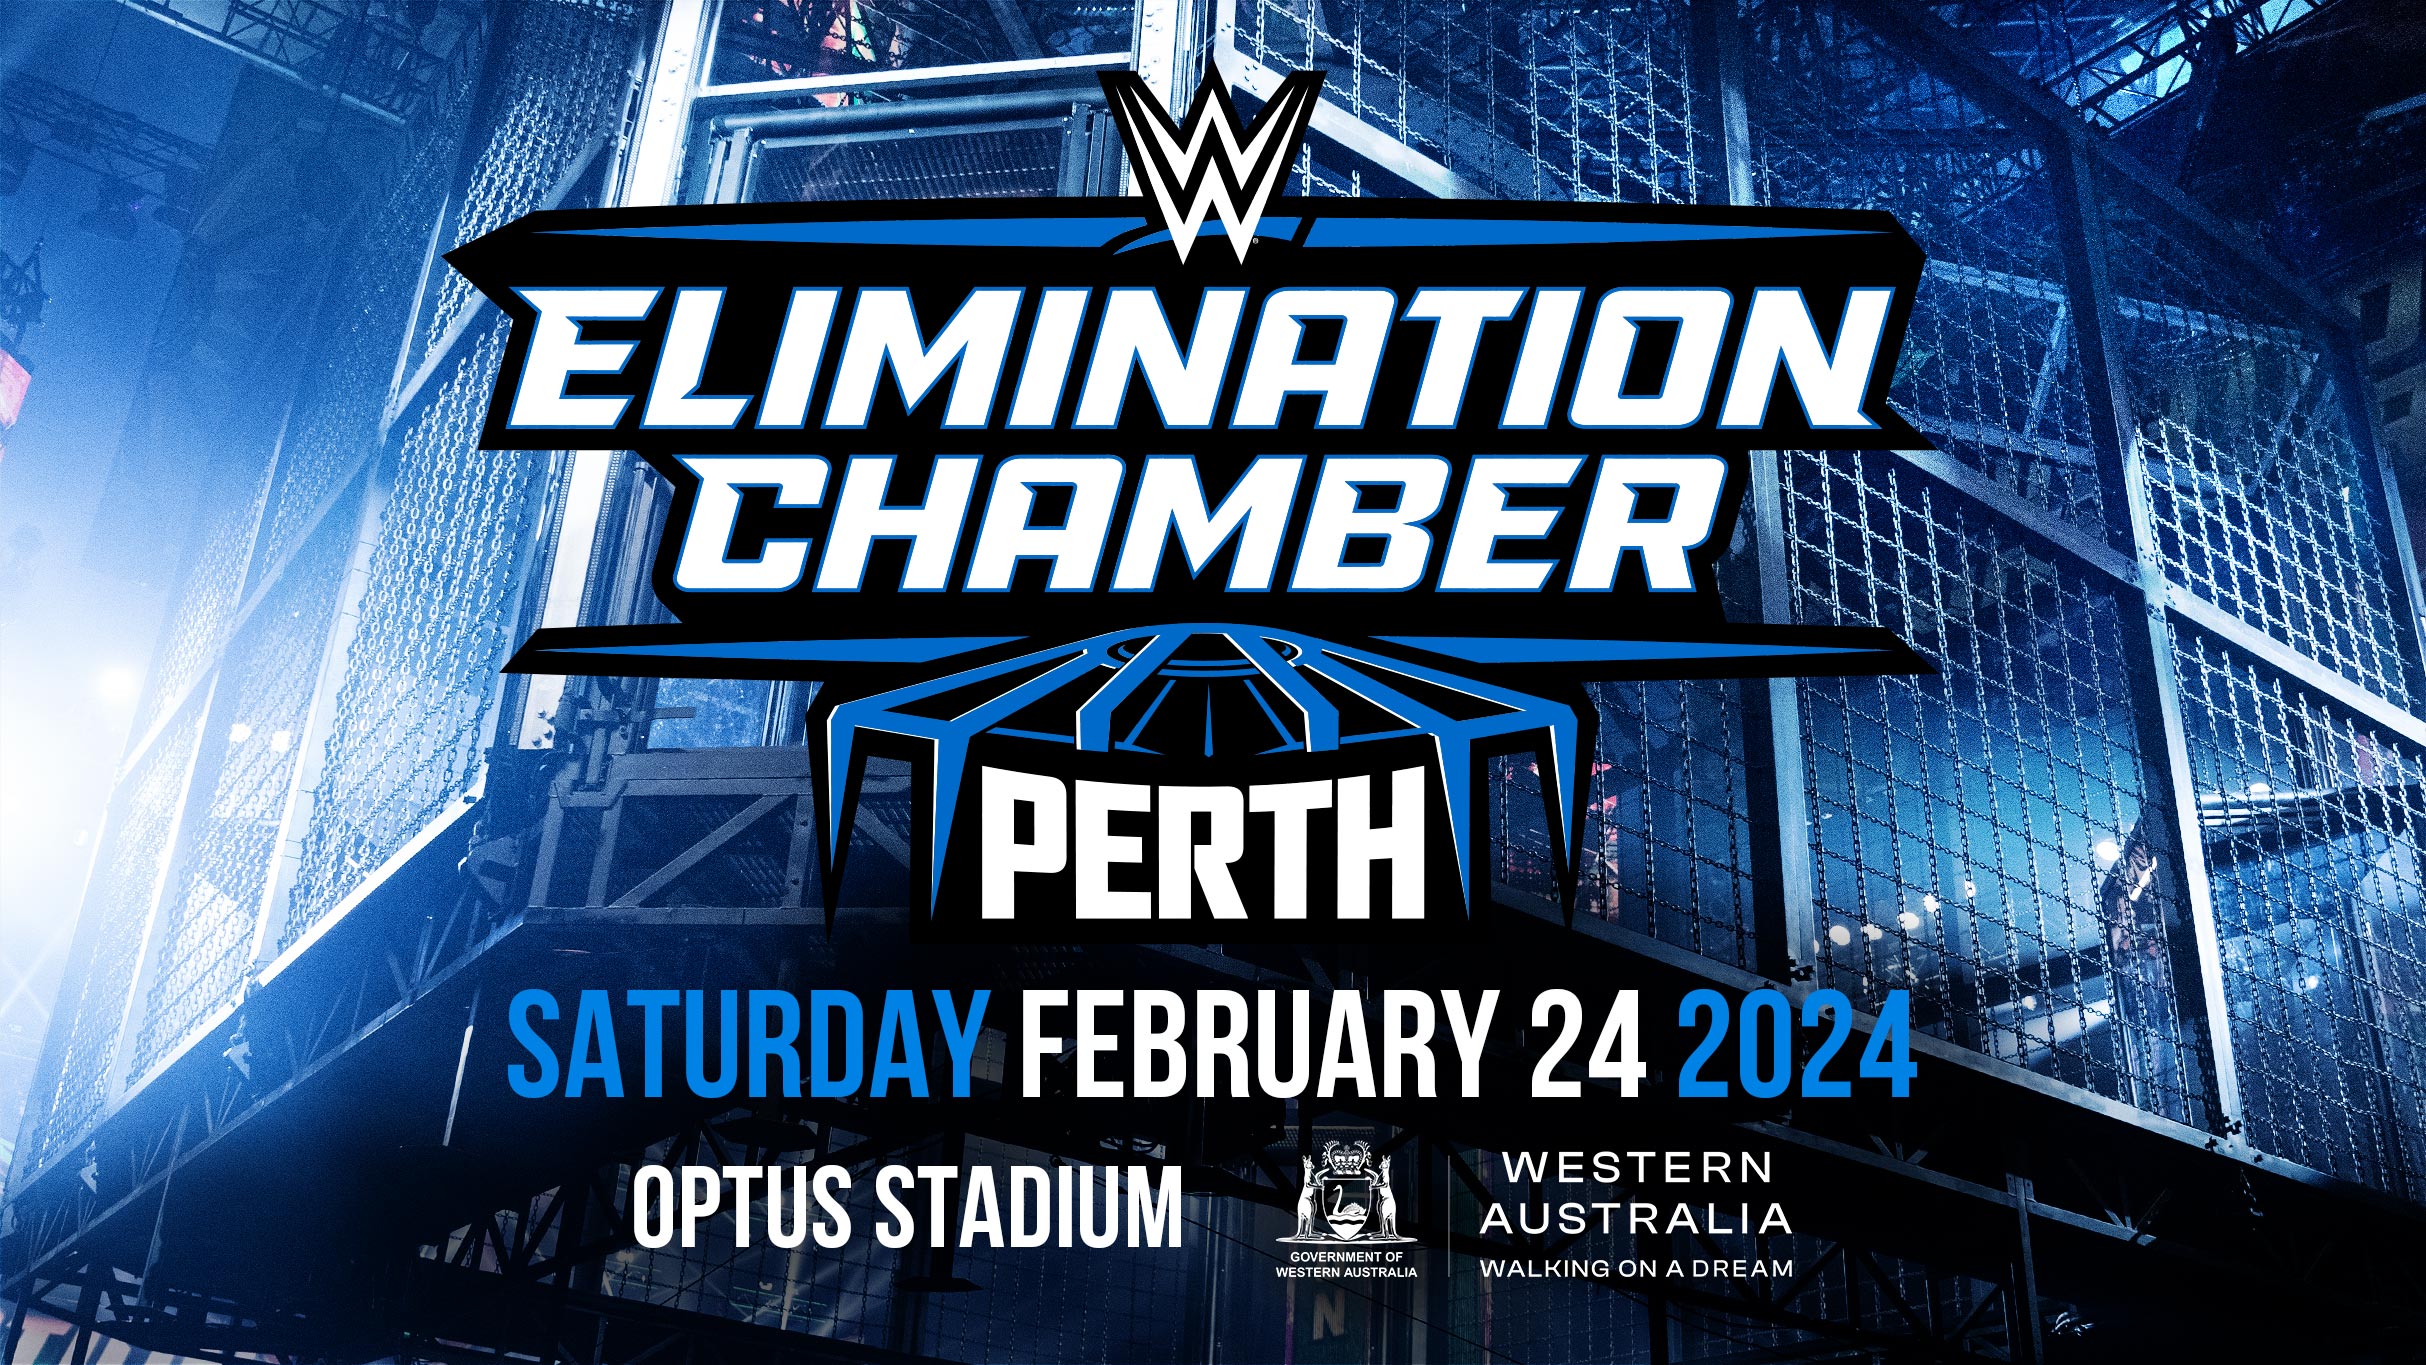 WWE: ELIMINATION CHAMBER PERTH in Burswood promo photo for Optus Stadium presale offer code